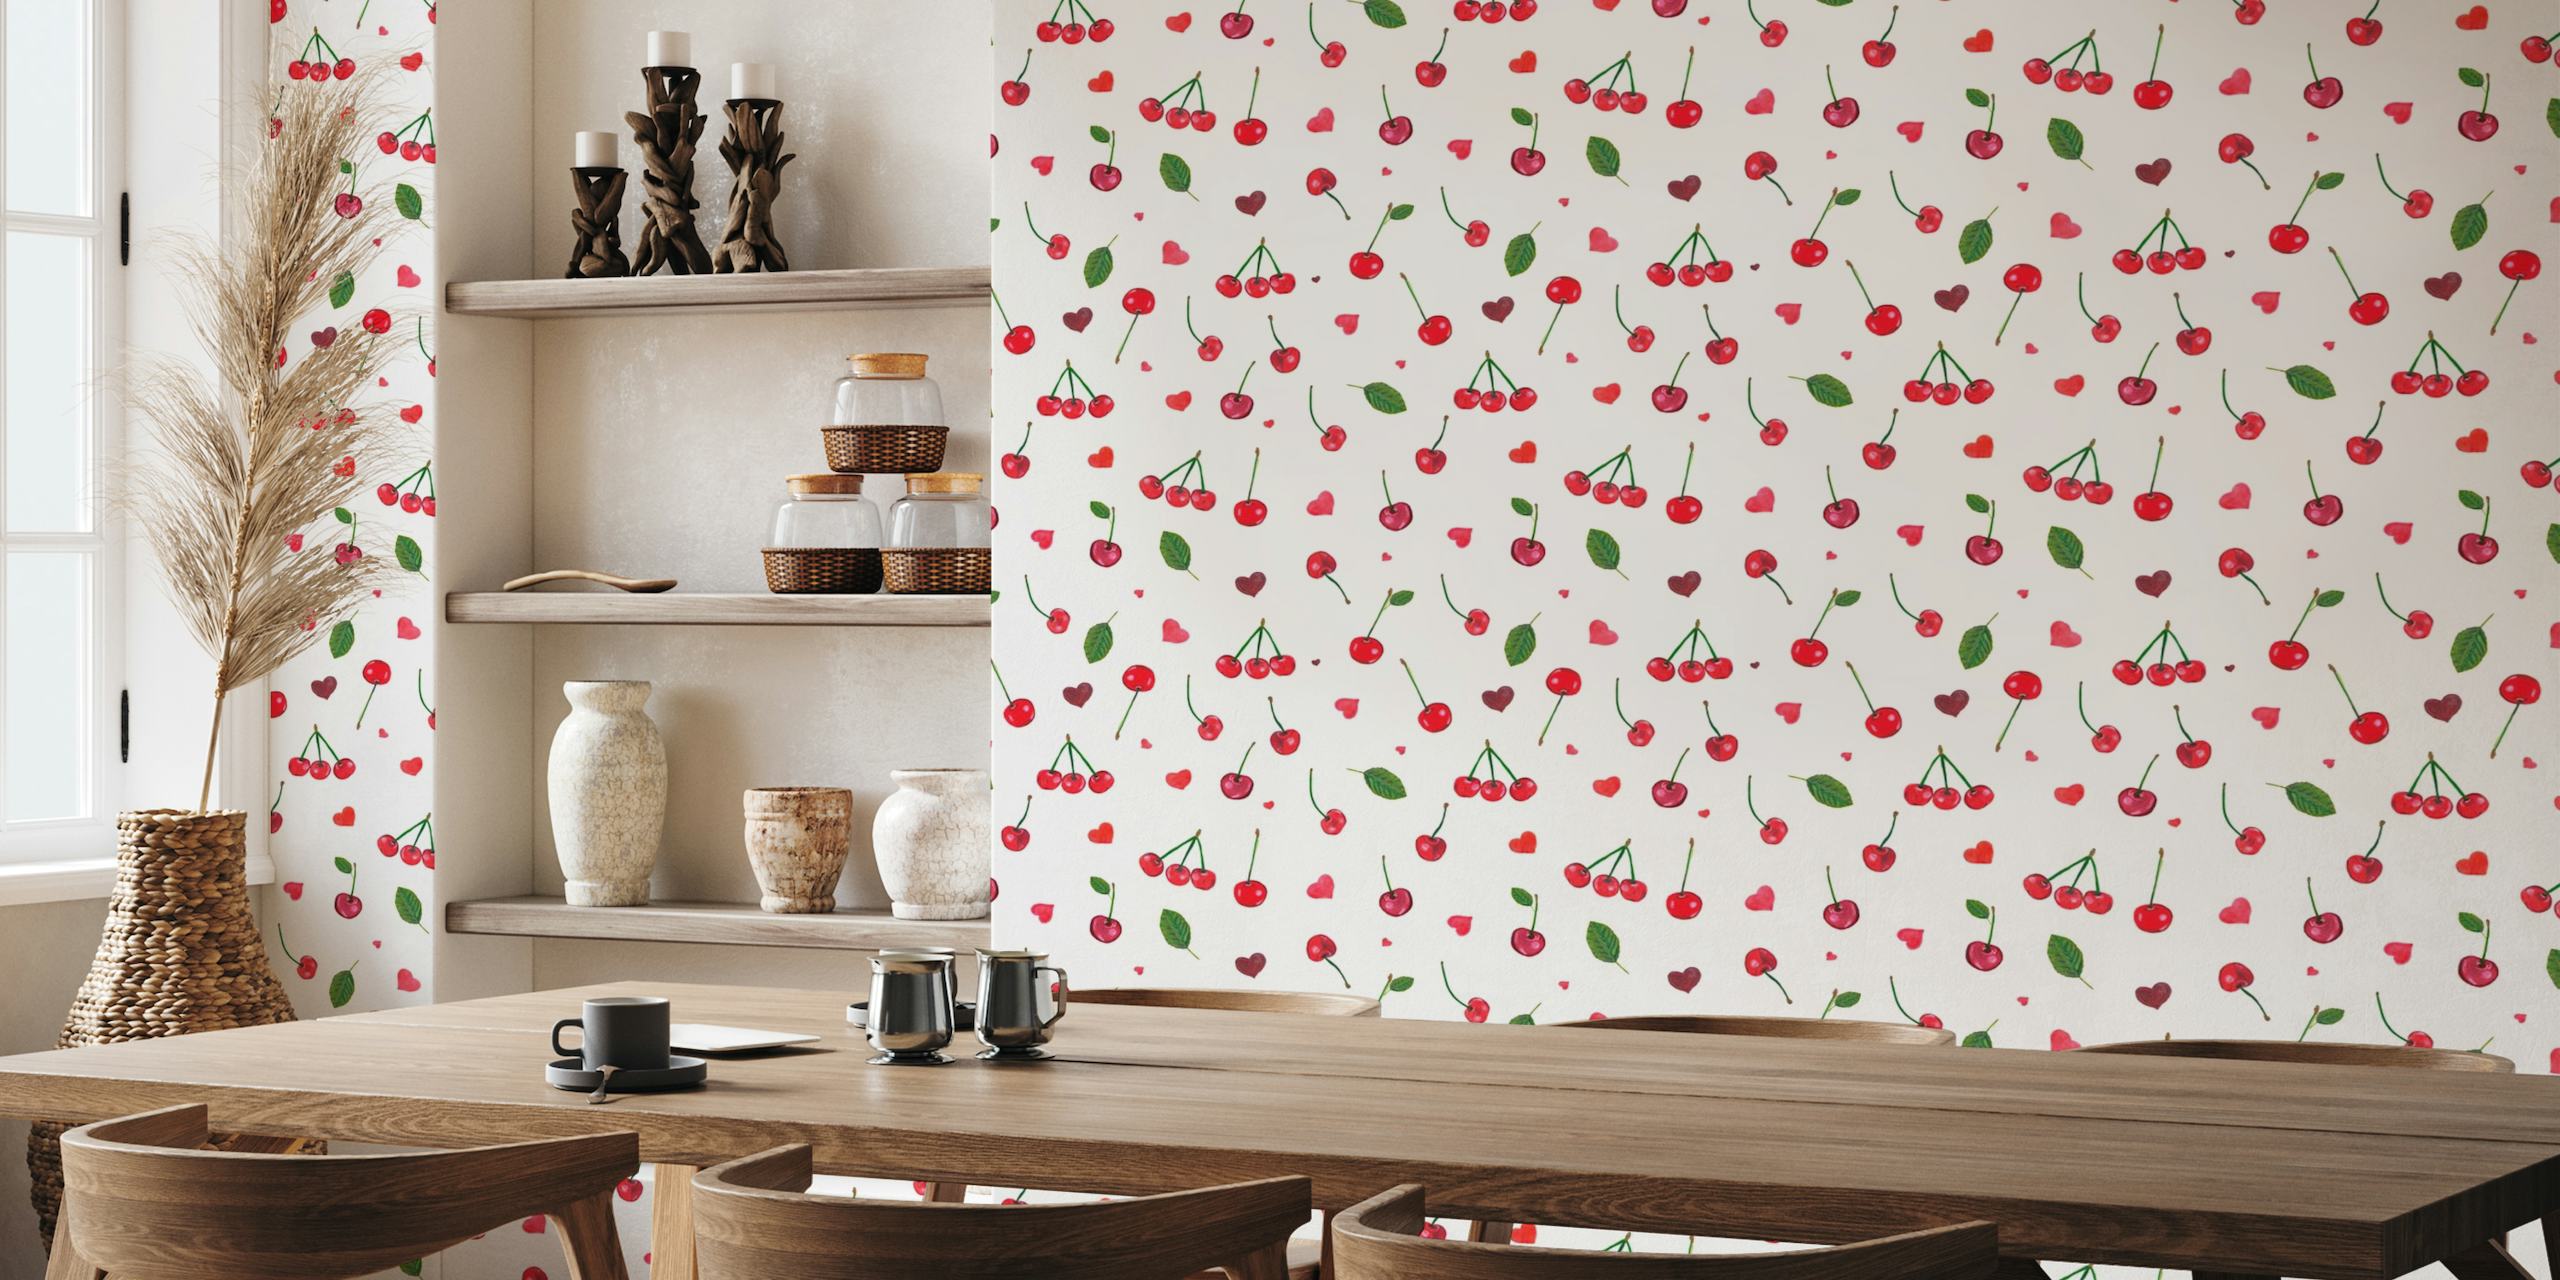 Cherries and cute red hearts white ταπετσαρία